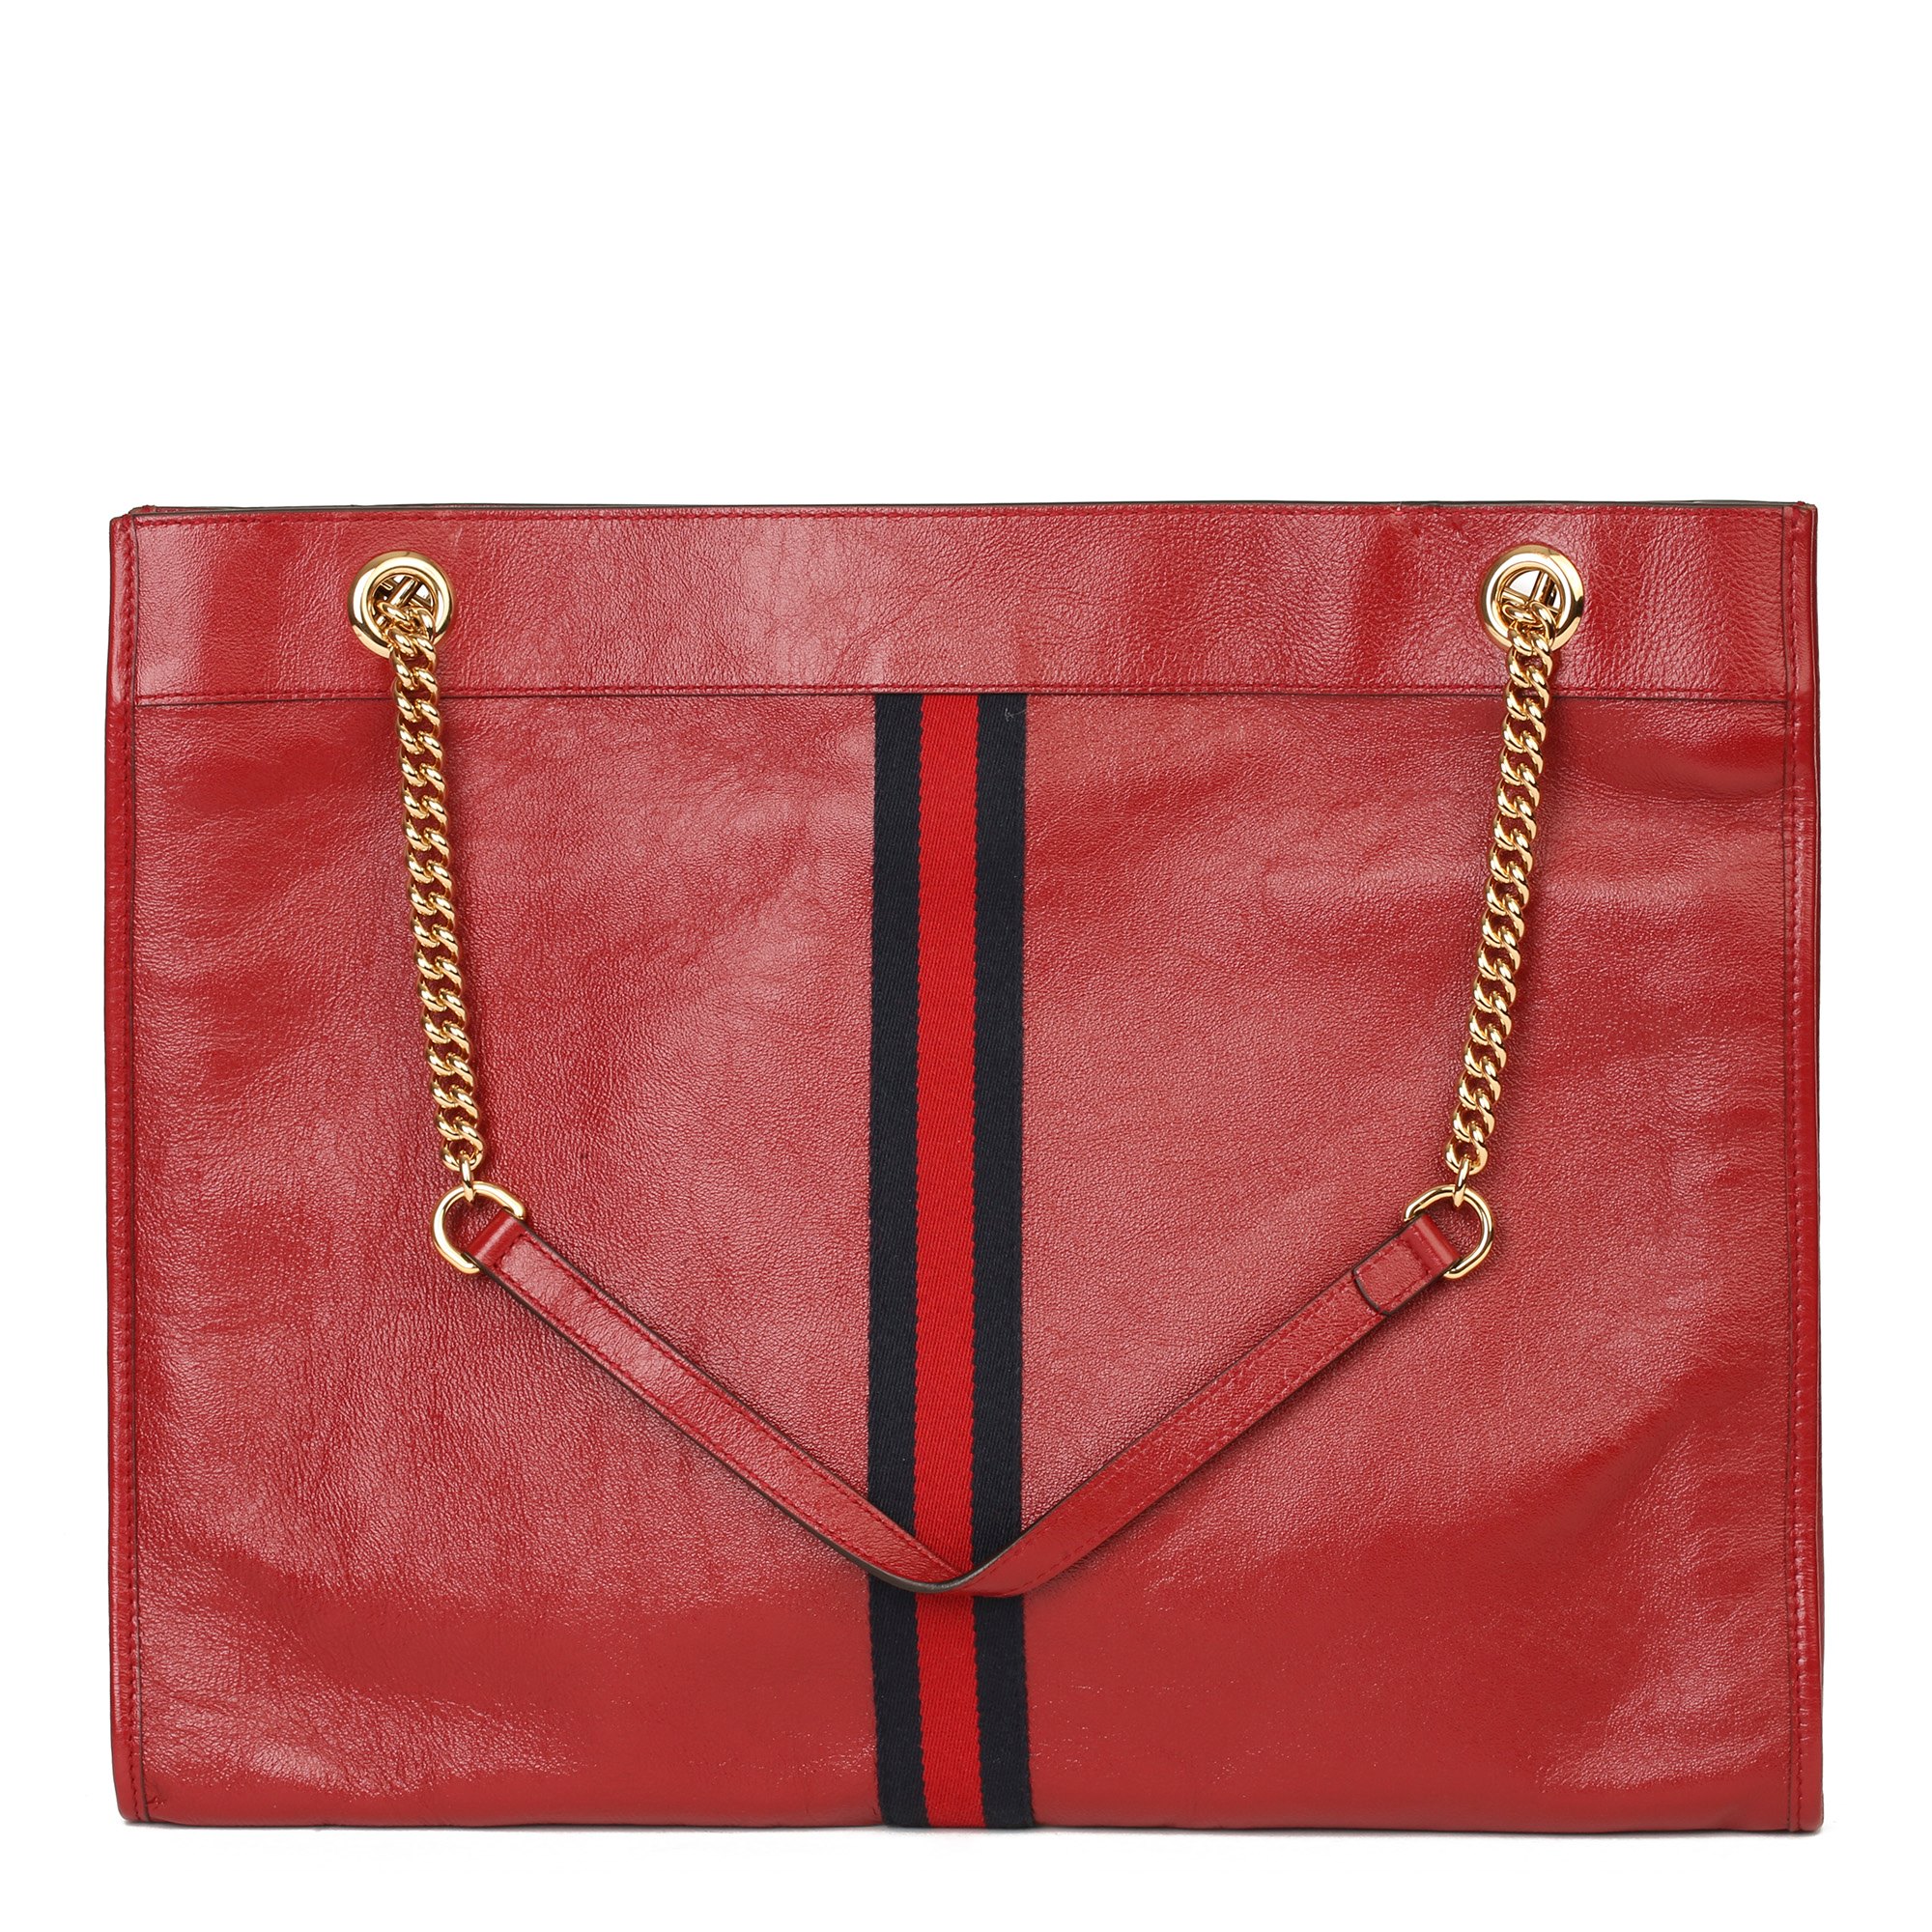 Gucci Red Aged Calfskin Leather Web Large Rajah Tote